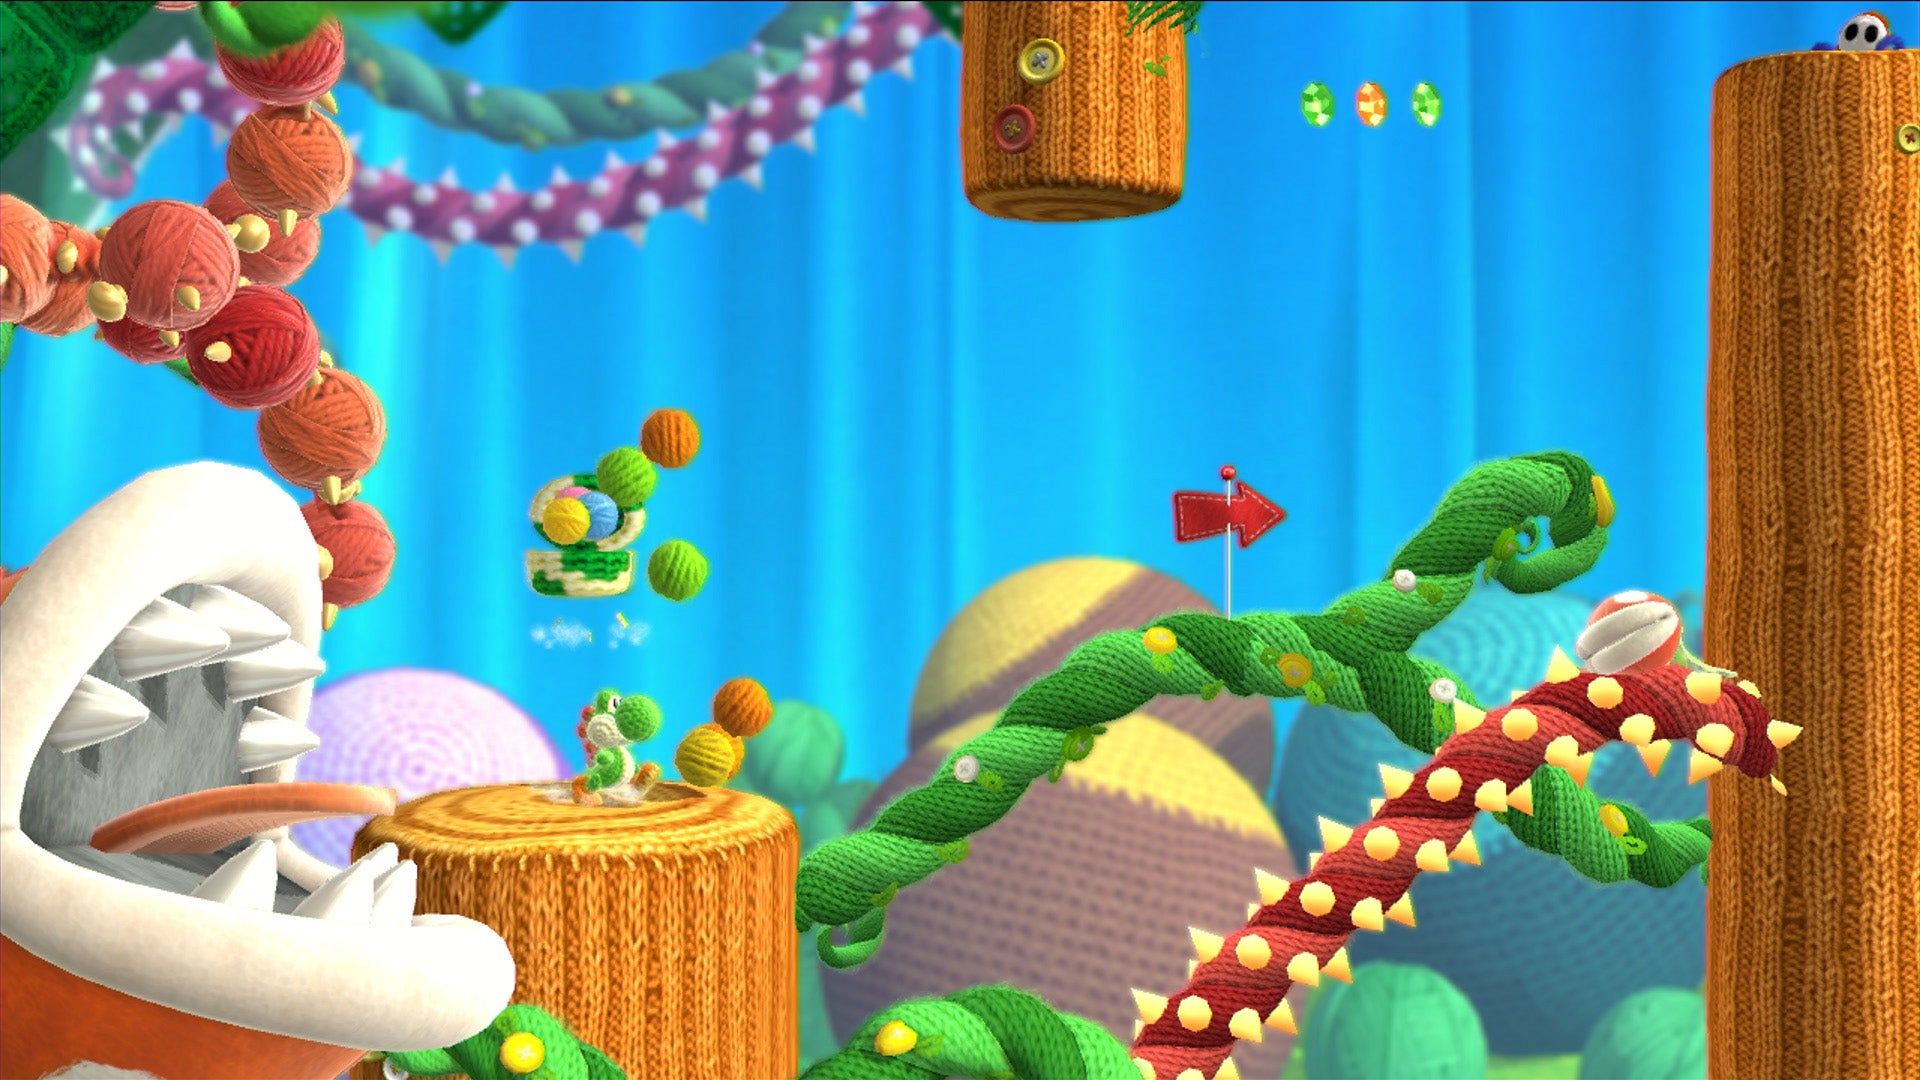 Yoshi's Woolly World review: a visual aesthetic that is simply mesmerising